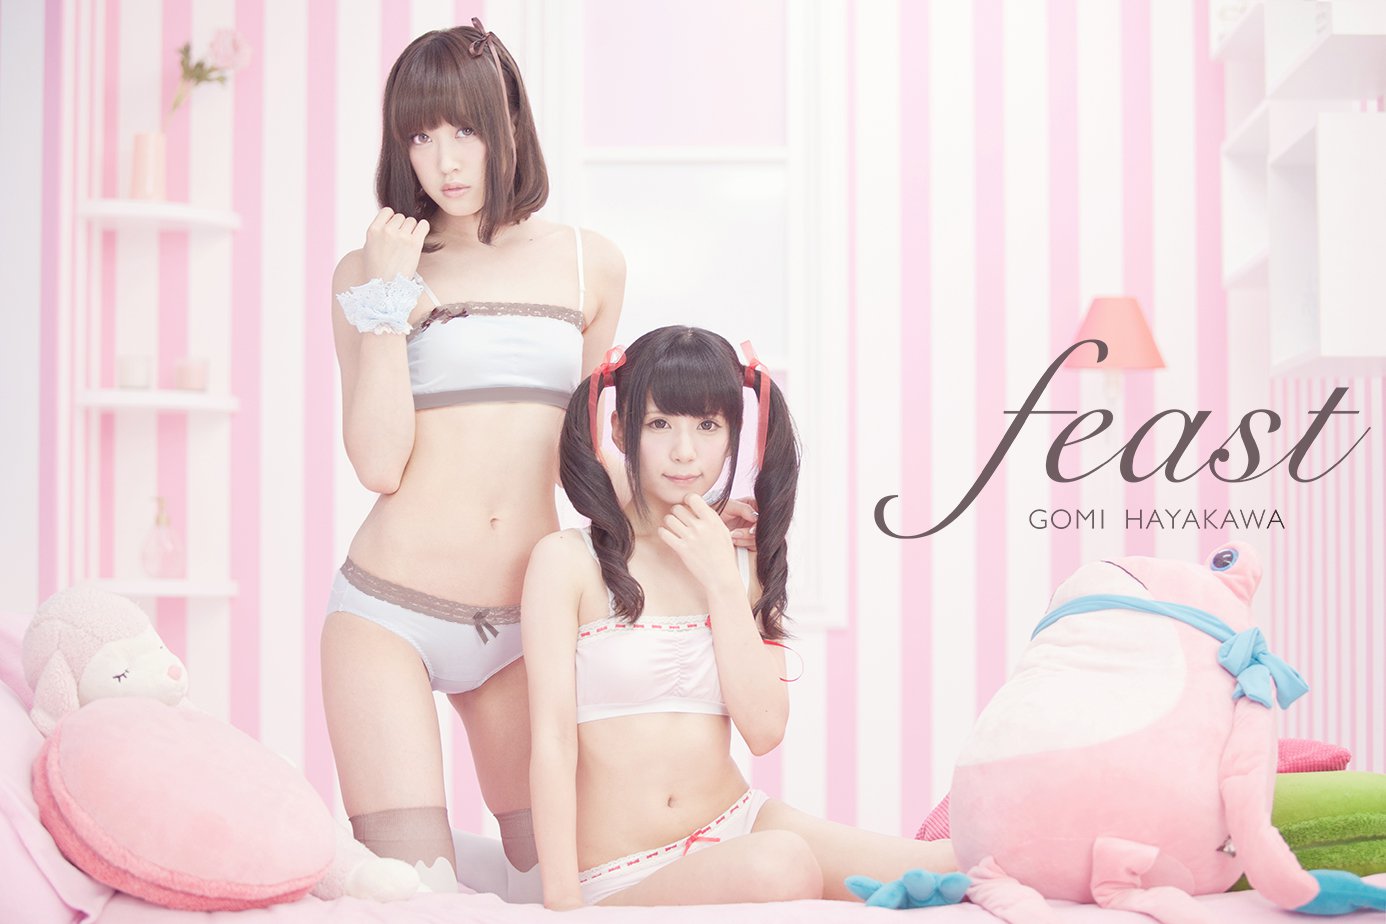 feast by GOMIHAYAKAWA, a Lingerie Brand for Women with Smaller Breasts, Holds its First Exhibition!